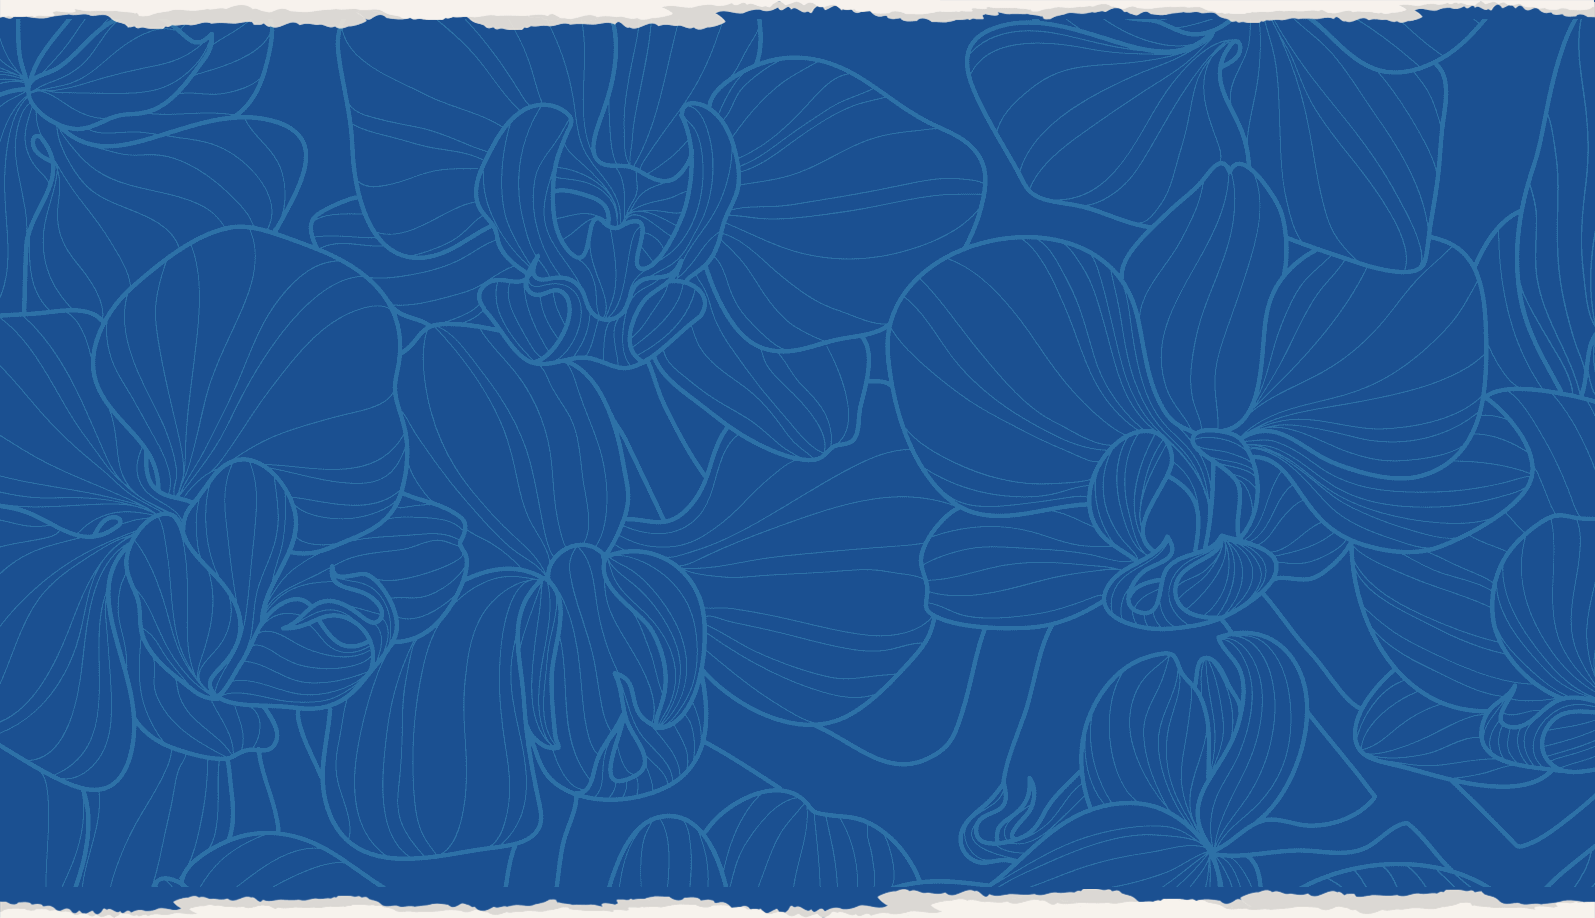 Decorative blue flower pattern with torn edge borders